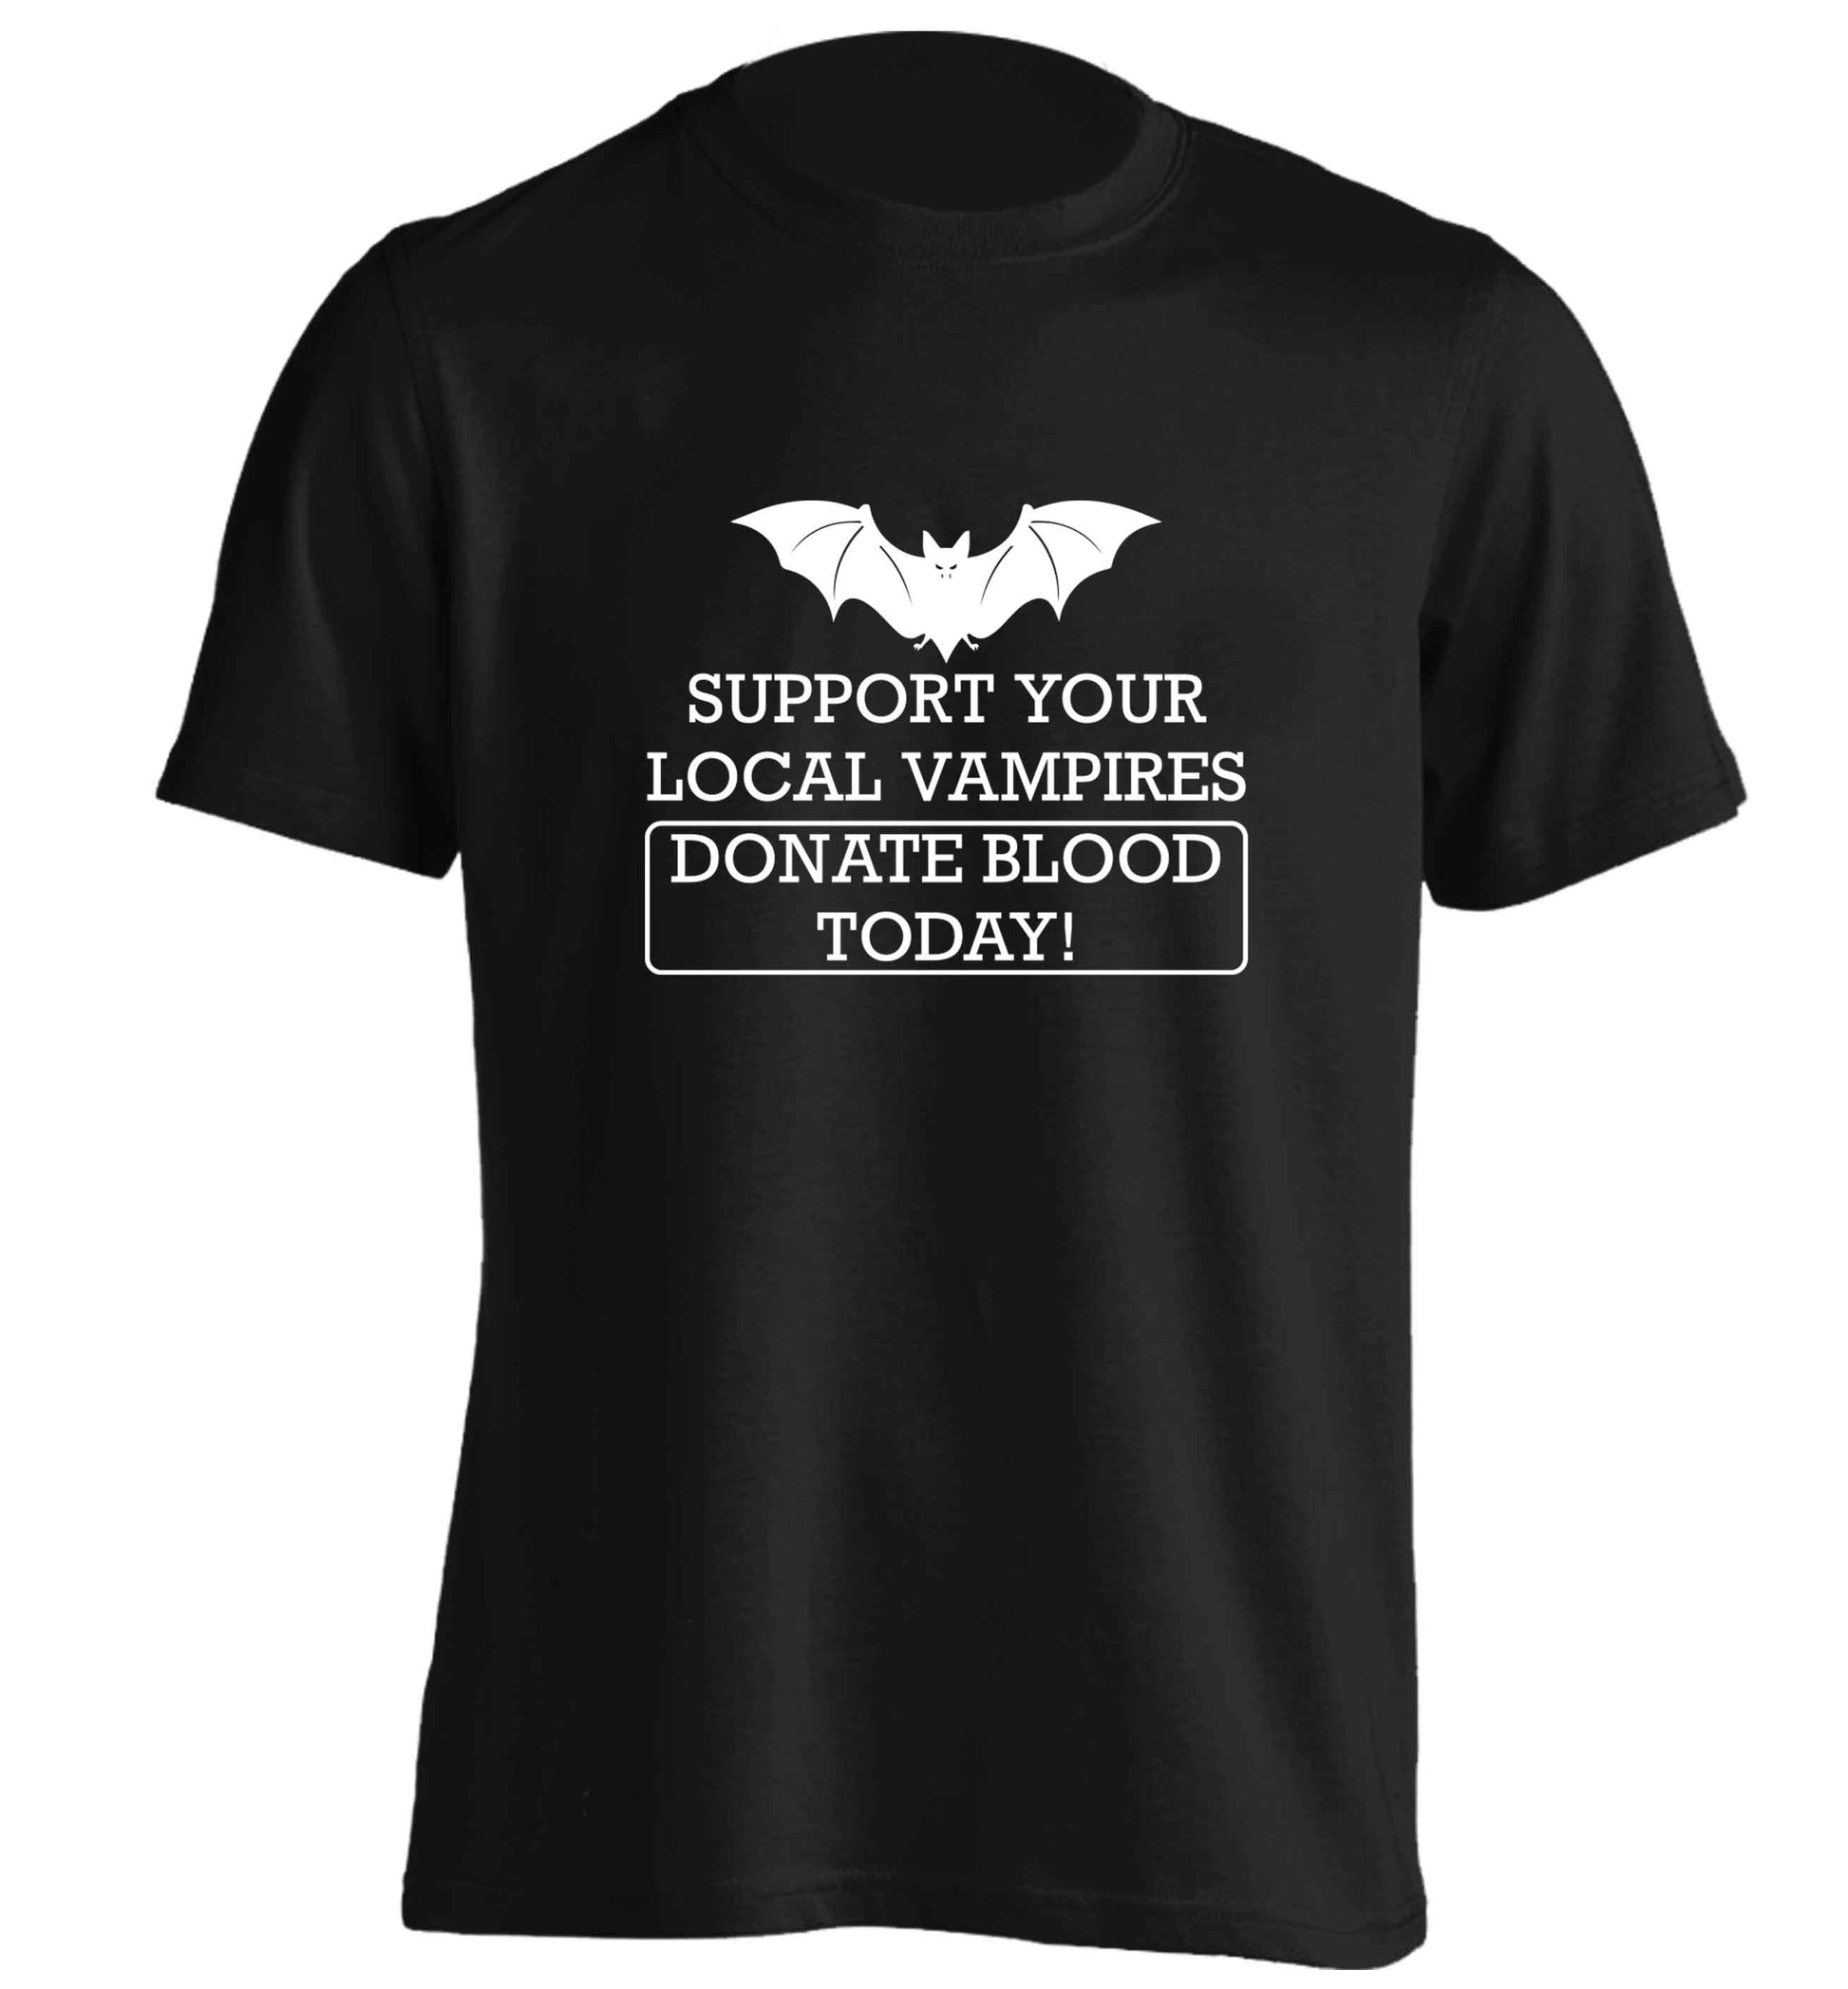 Support your local vampires donate blood today! adults unisex black Tshirt 2XL